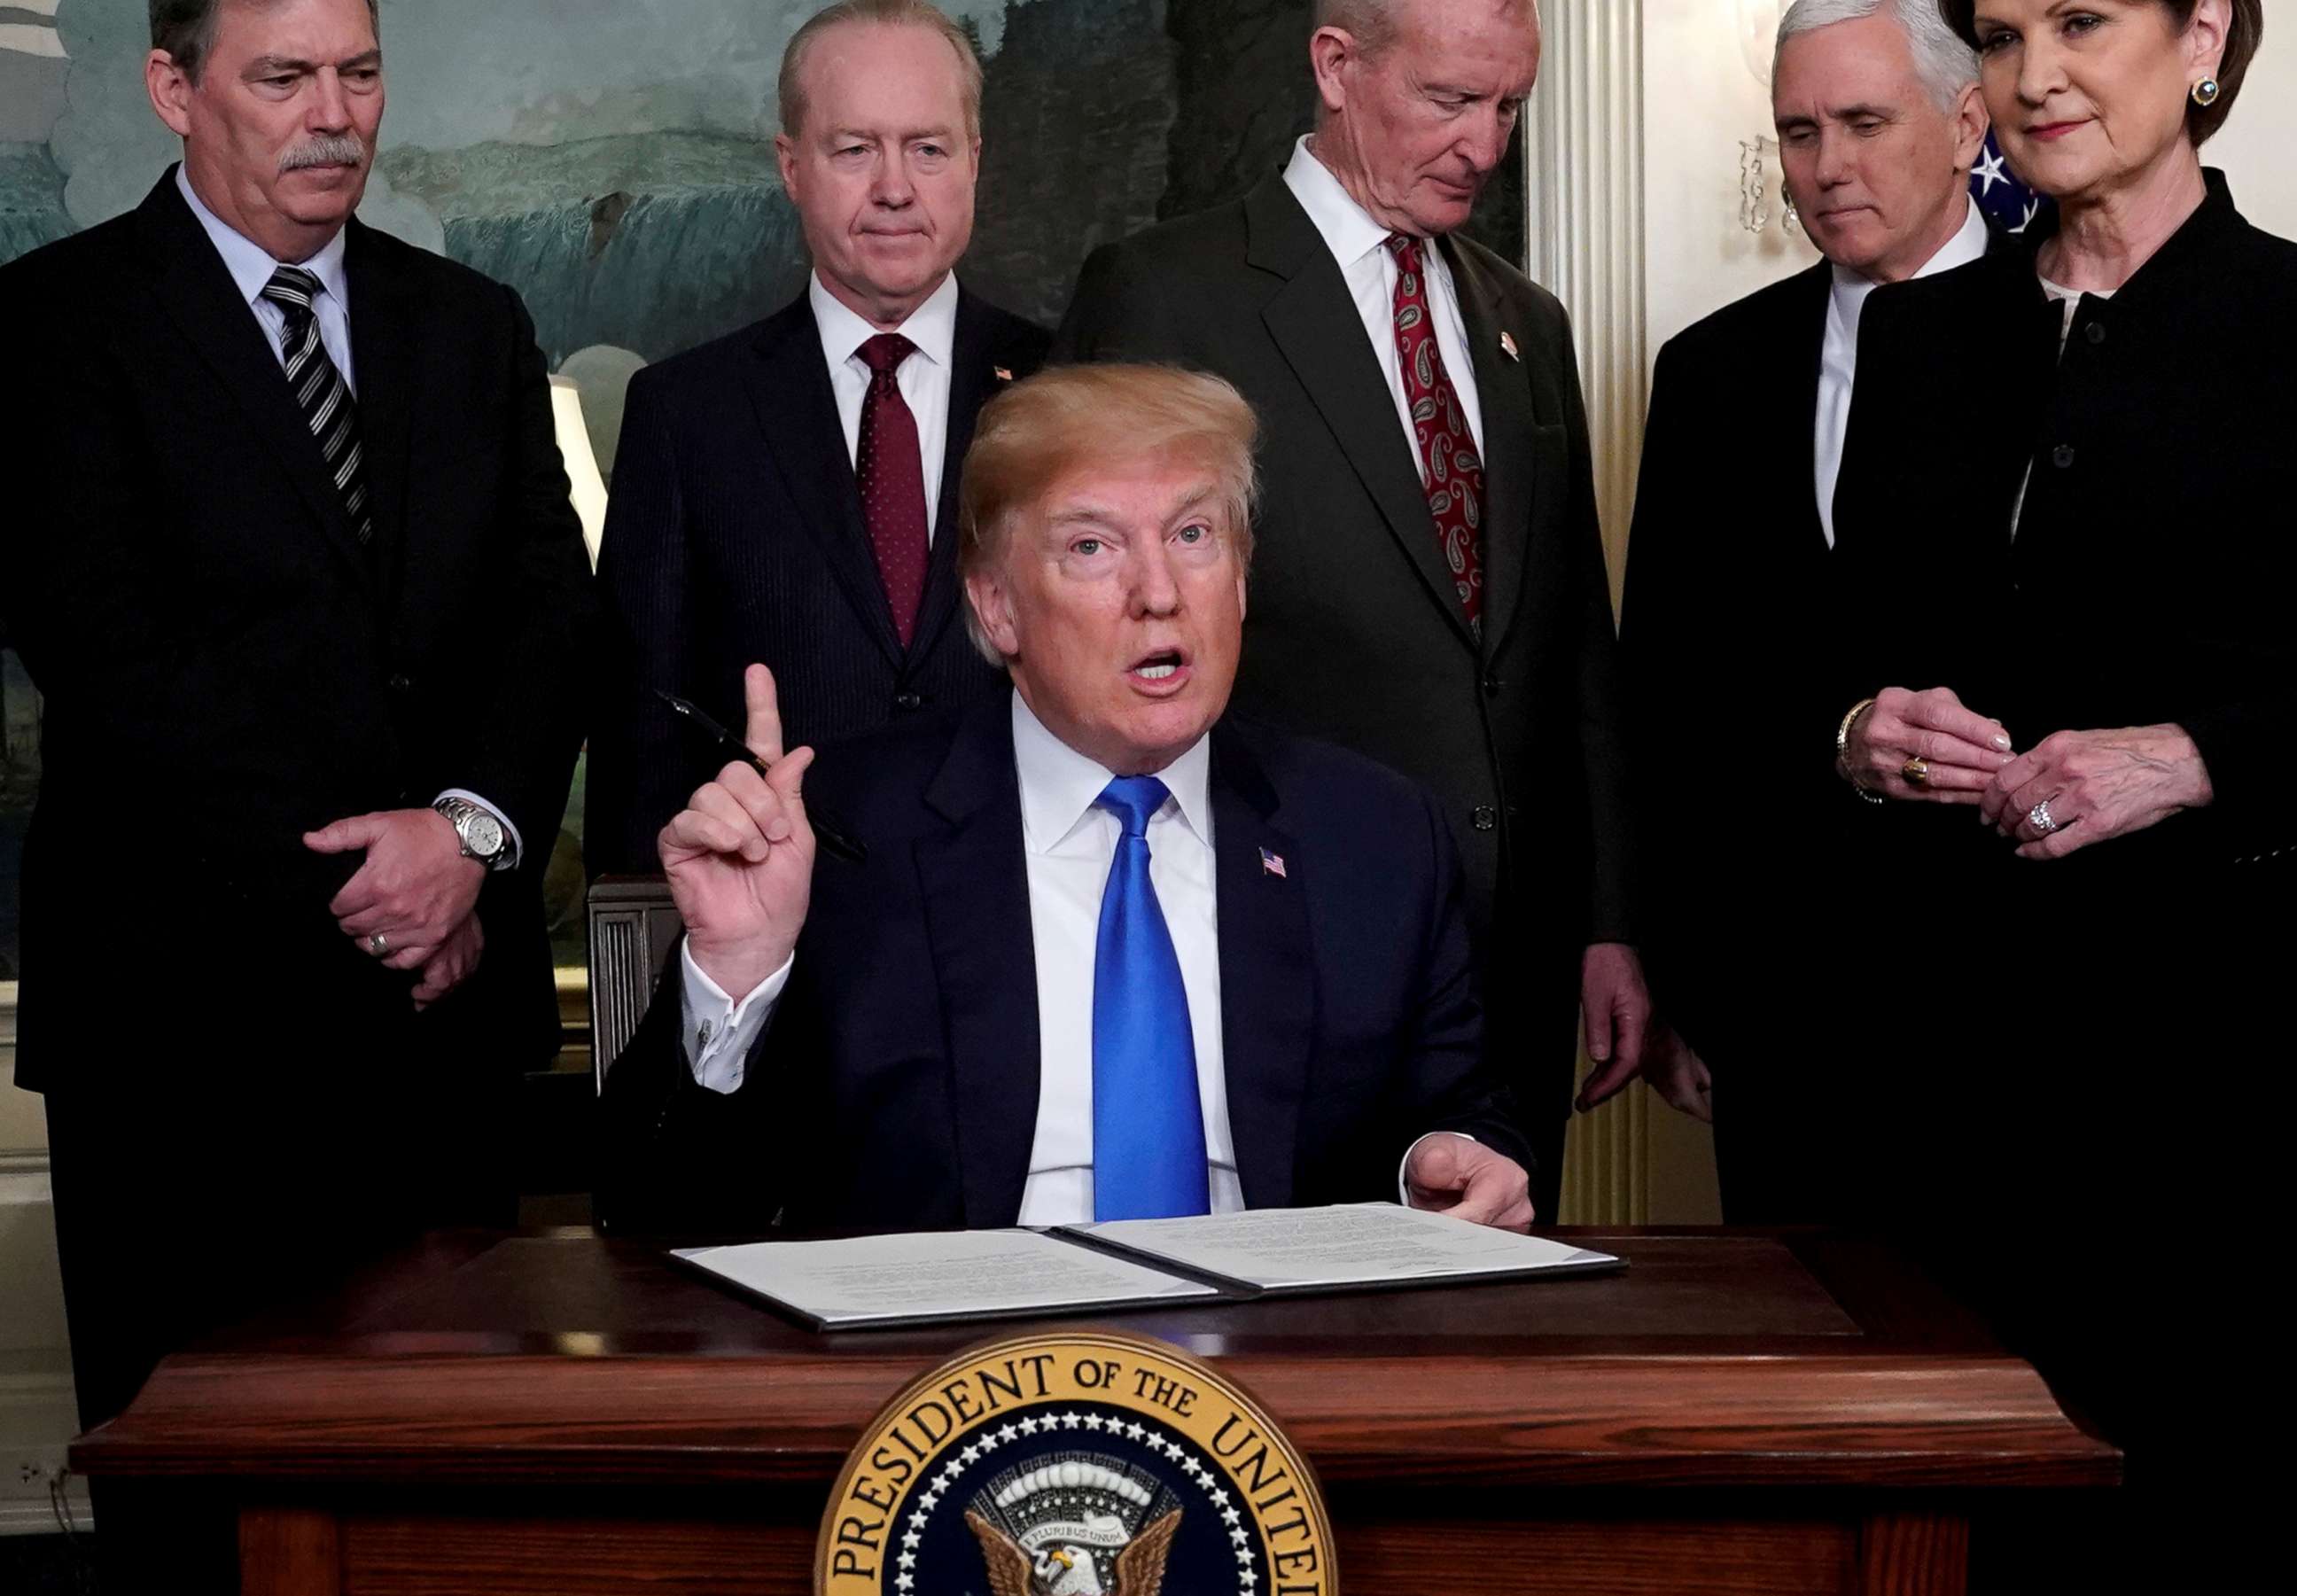 PHOTO: President Donald Trump, surrounded by business leaders and administration officials, prepares to sign a memorandum on intellectual property tariffs on high-tech goods from China, at the White House in Washington, March 22, 2018.